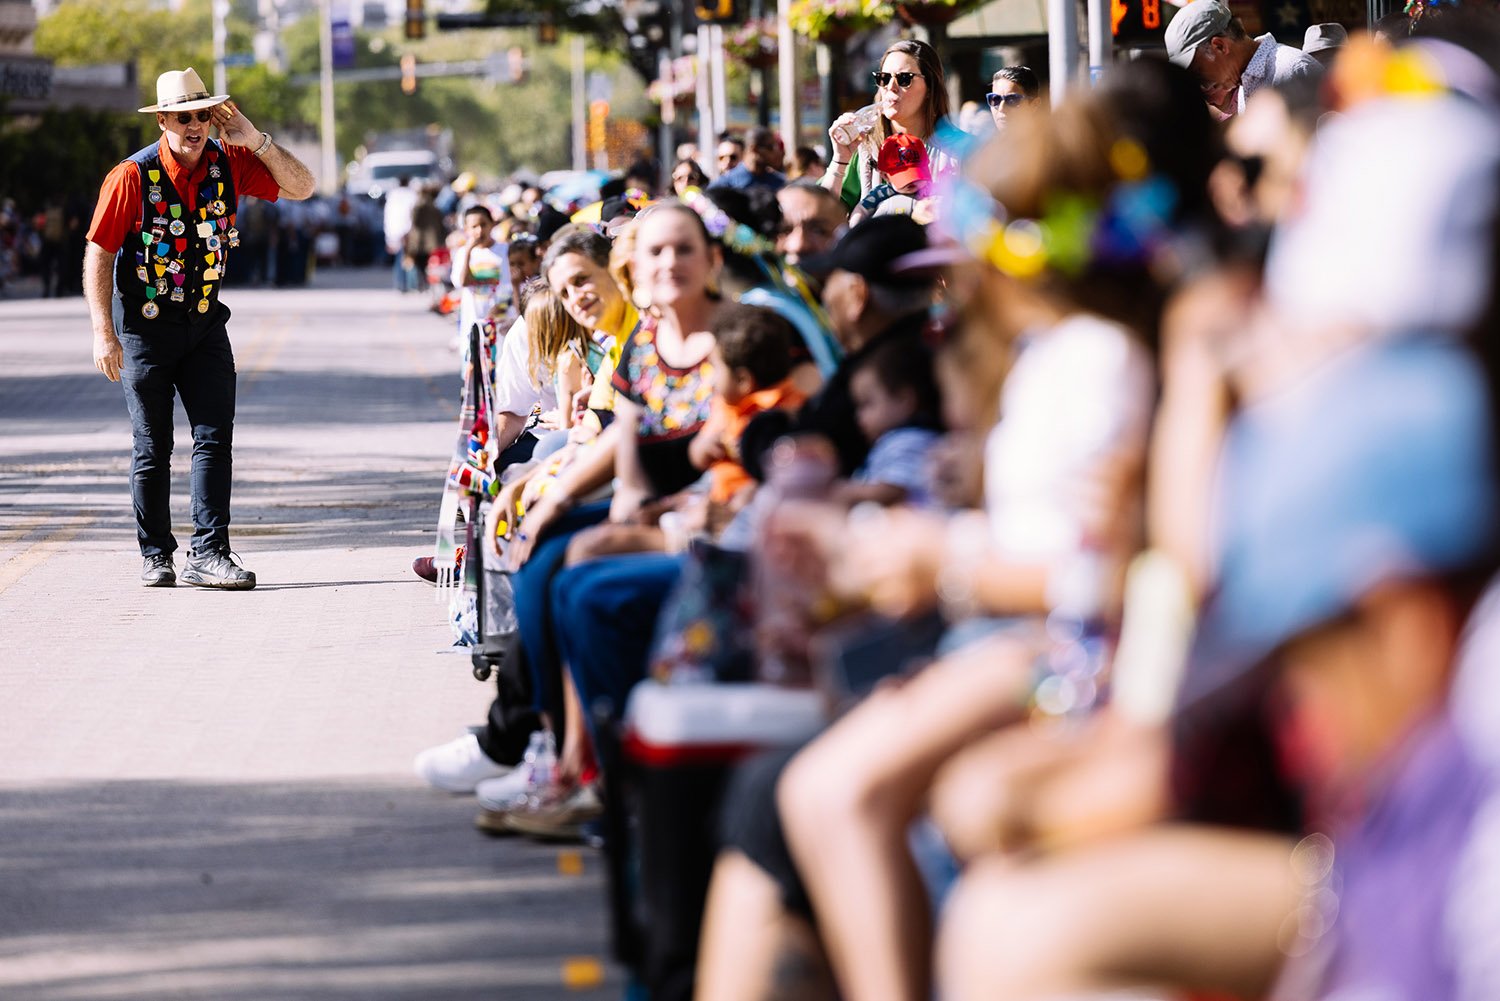 Thousands of people attend the Battle of Flowers Parade on Friday, April 8, 2022, in San Antonio, Texas. Photo by Chris Stokes | Heron contributor